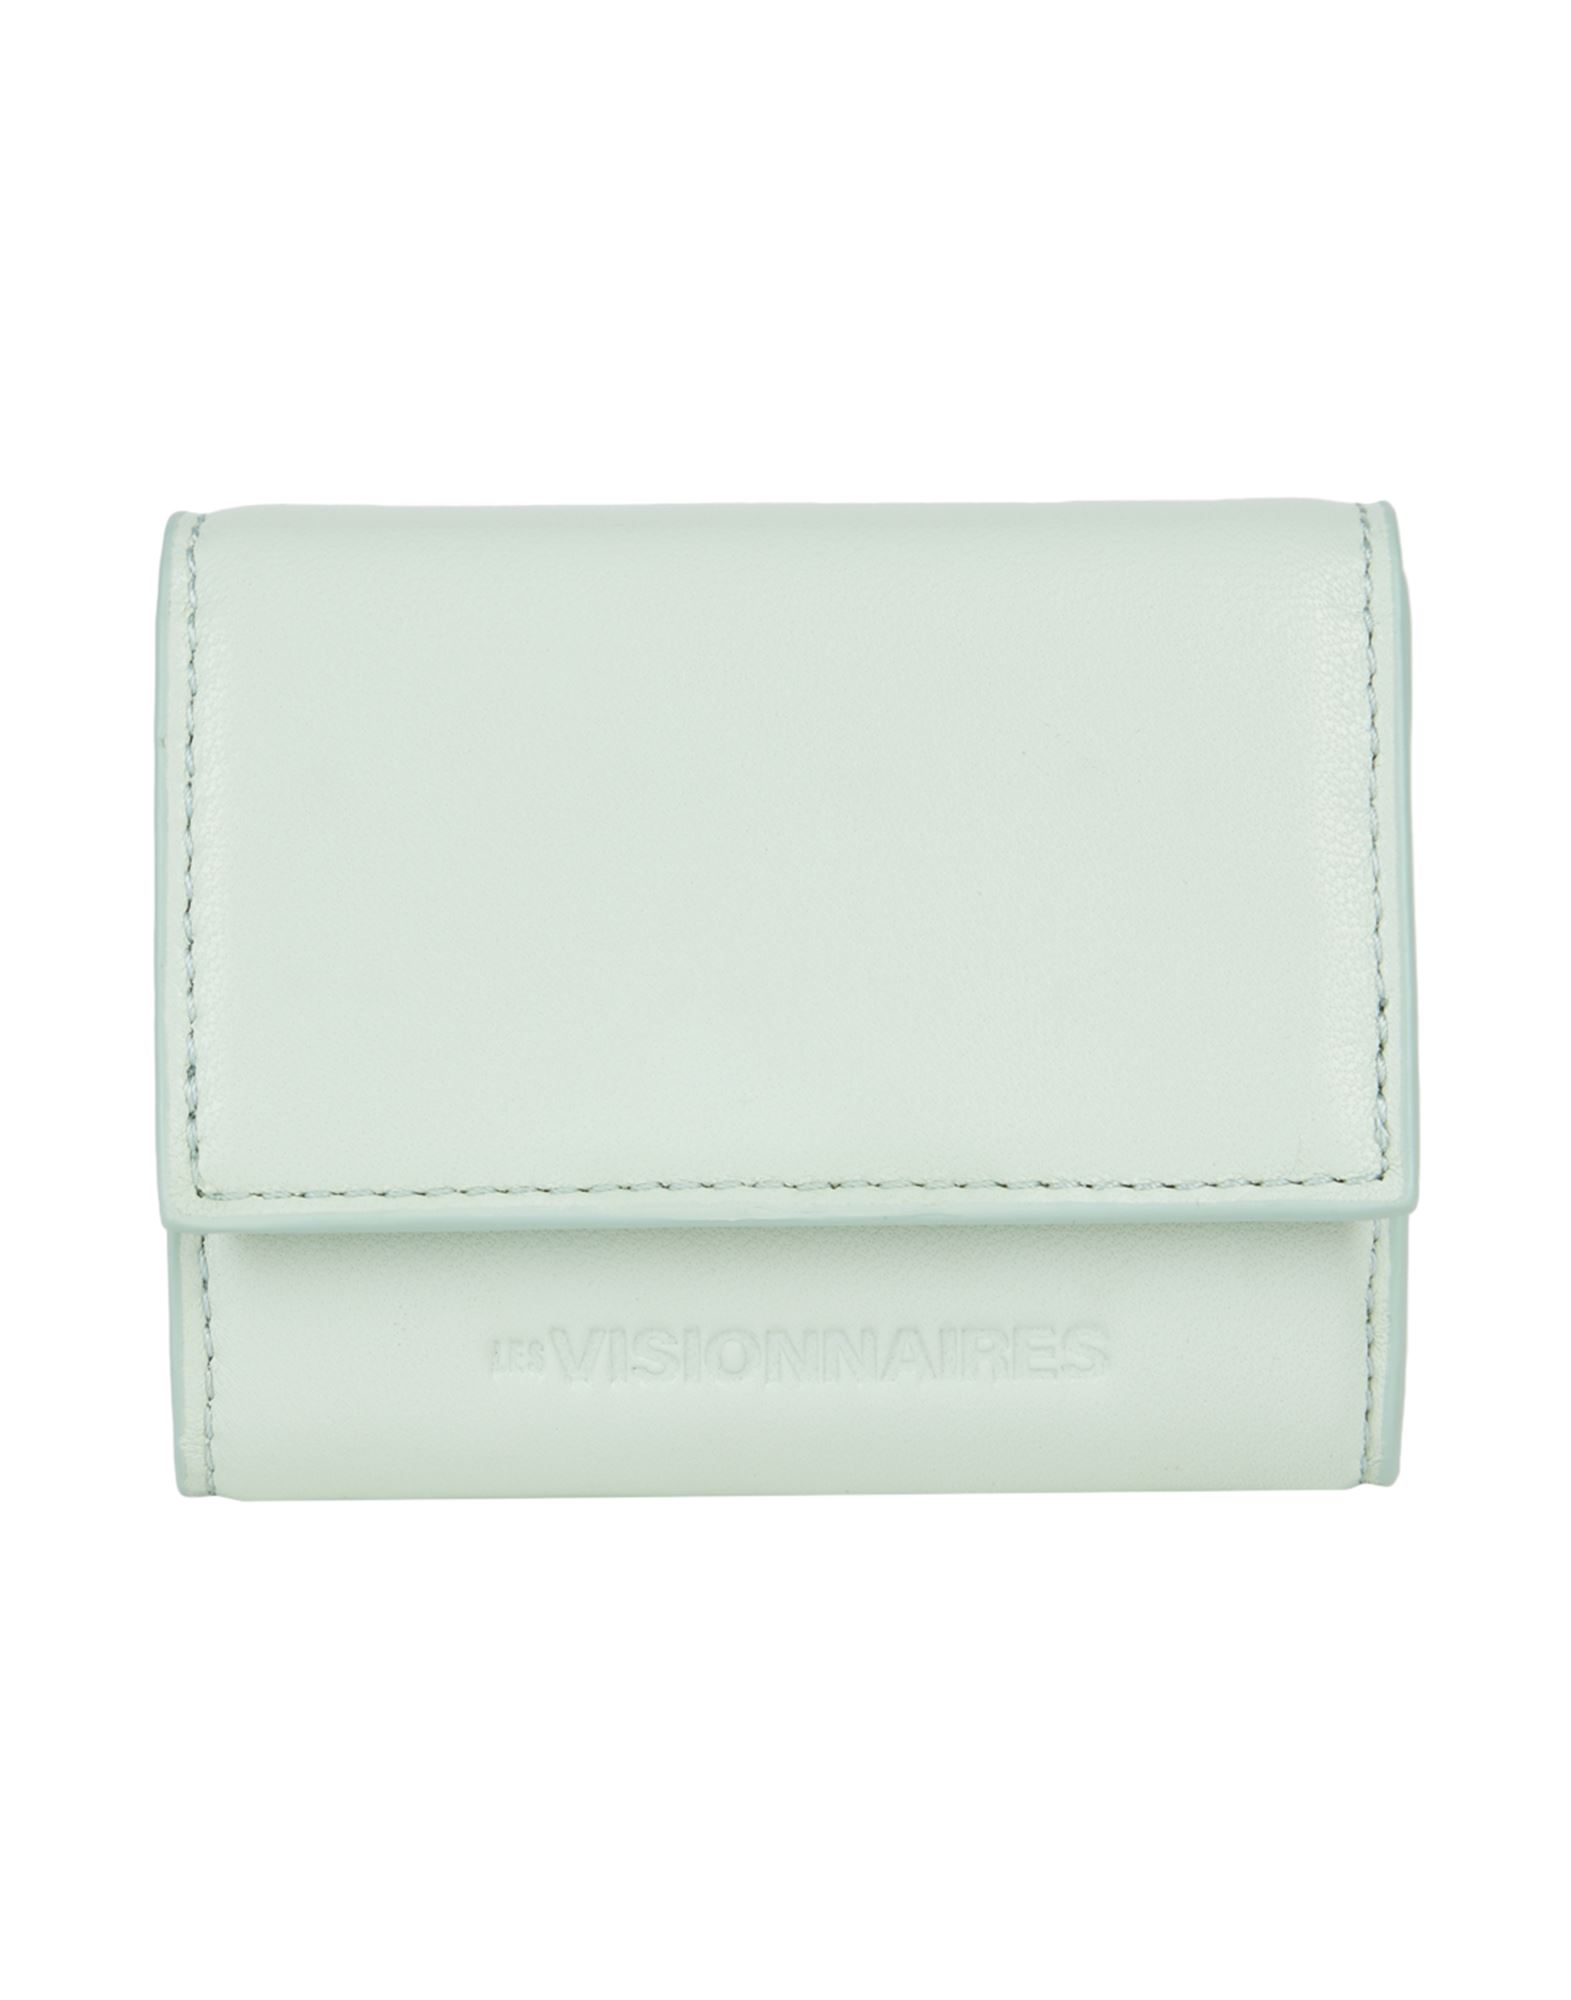 LES VISIONNAIRES LES VISIONNAIRES MELE SILKY LEATHER WOMAN WALLET LIGHT GREEN SIZE - LAMBSKIN